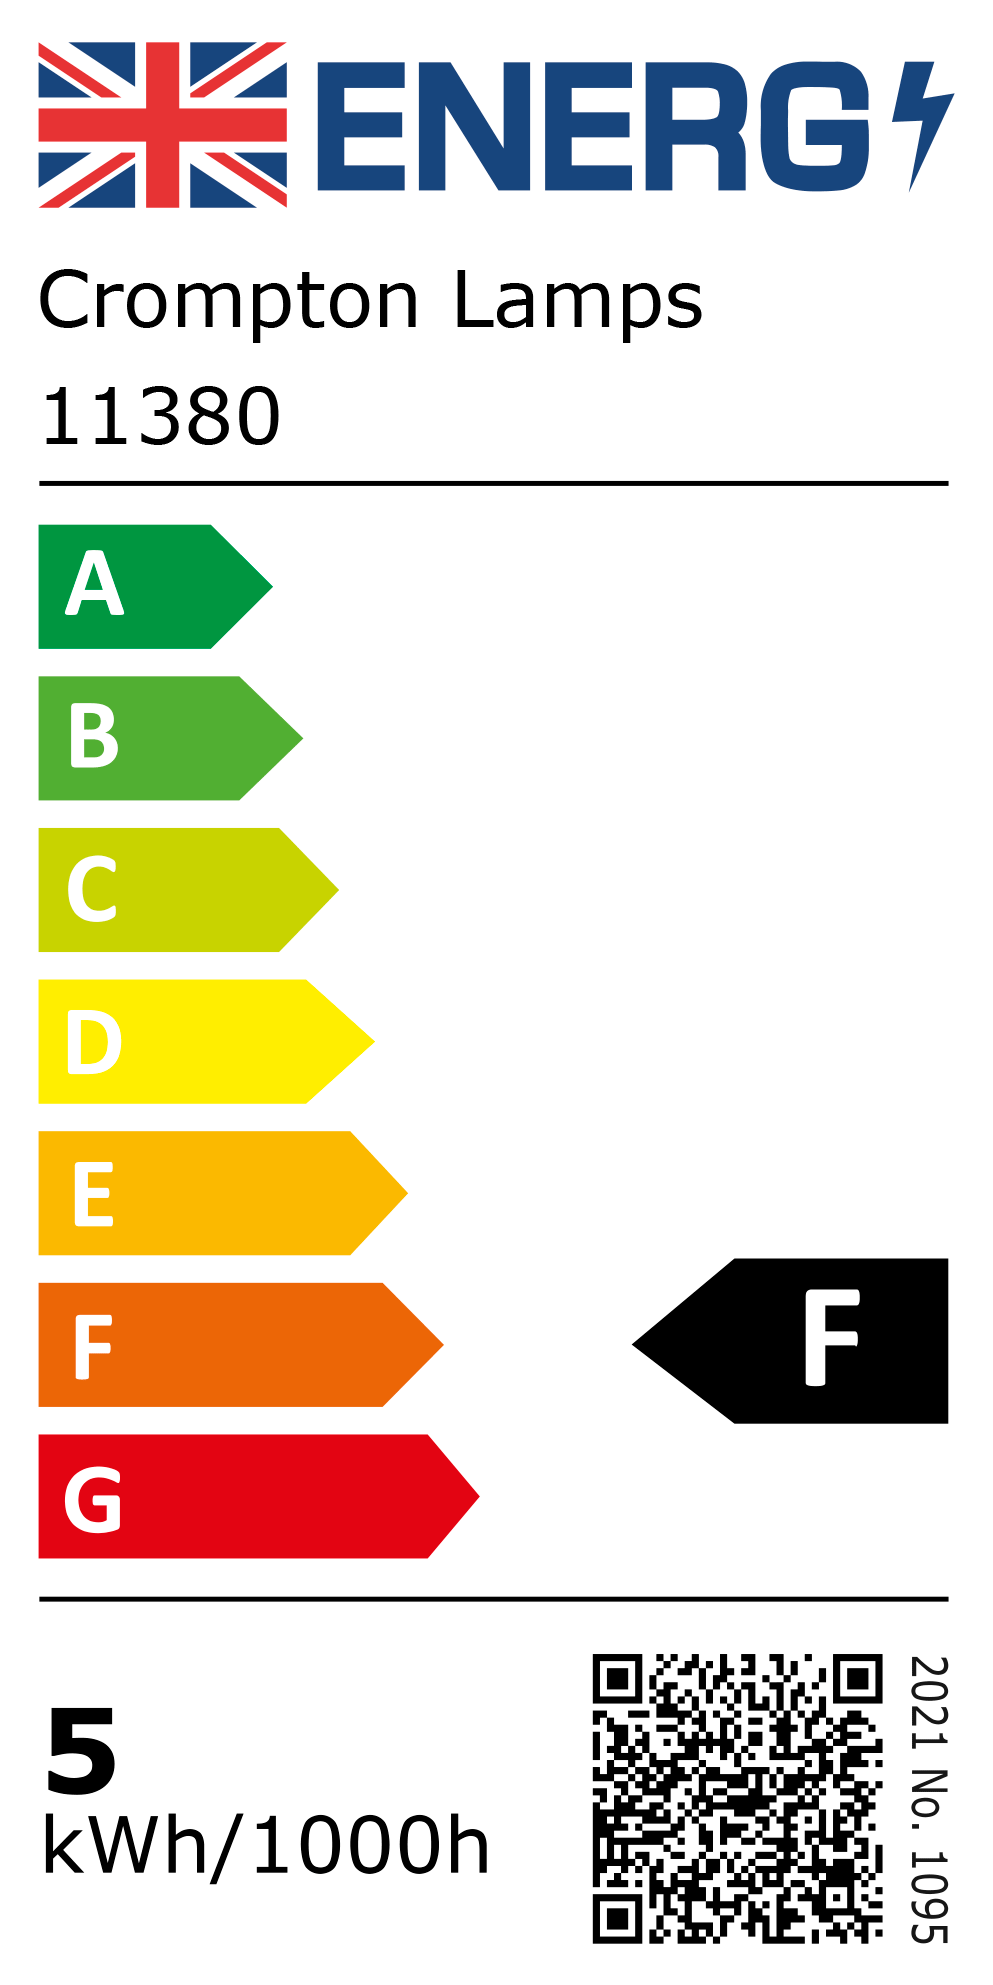 New 2021 Energy Rating Label: Stock Code 11380